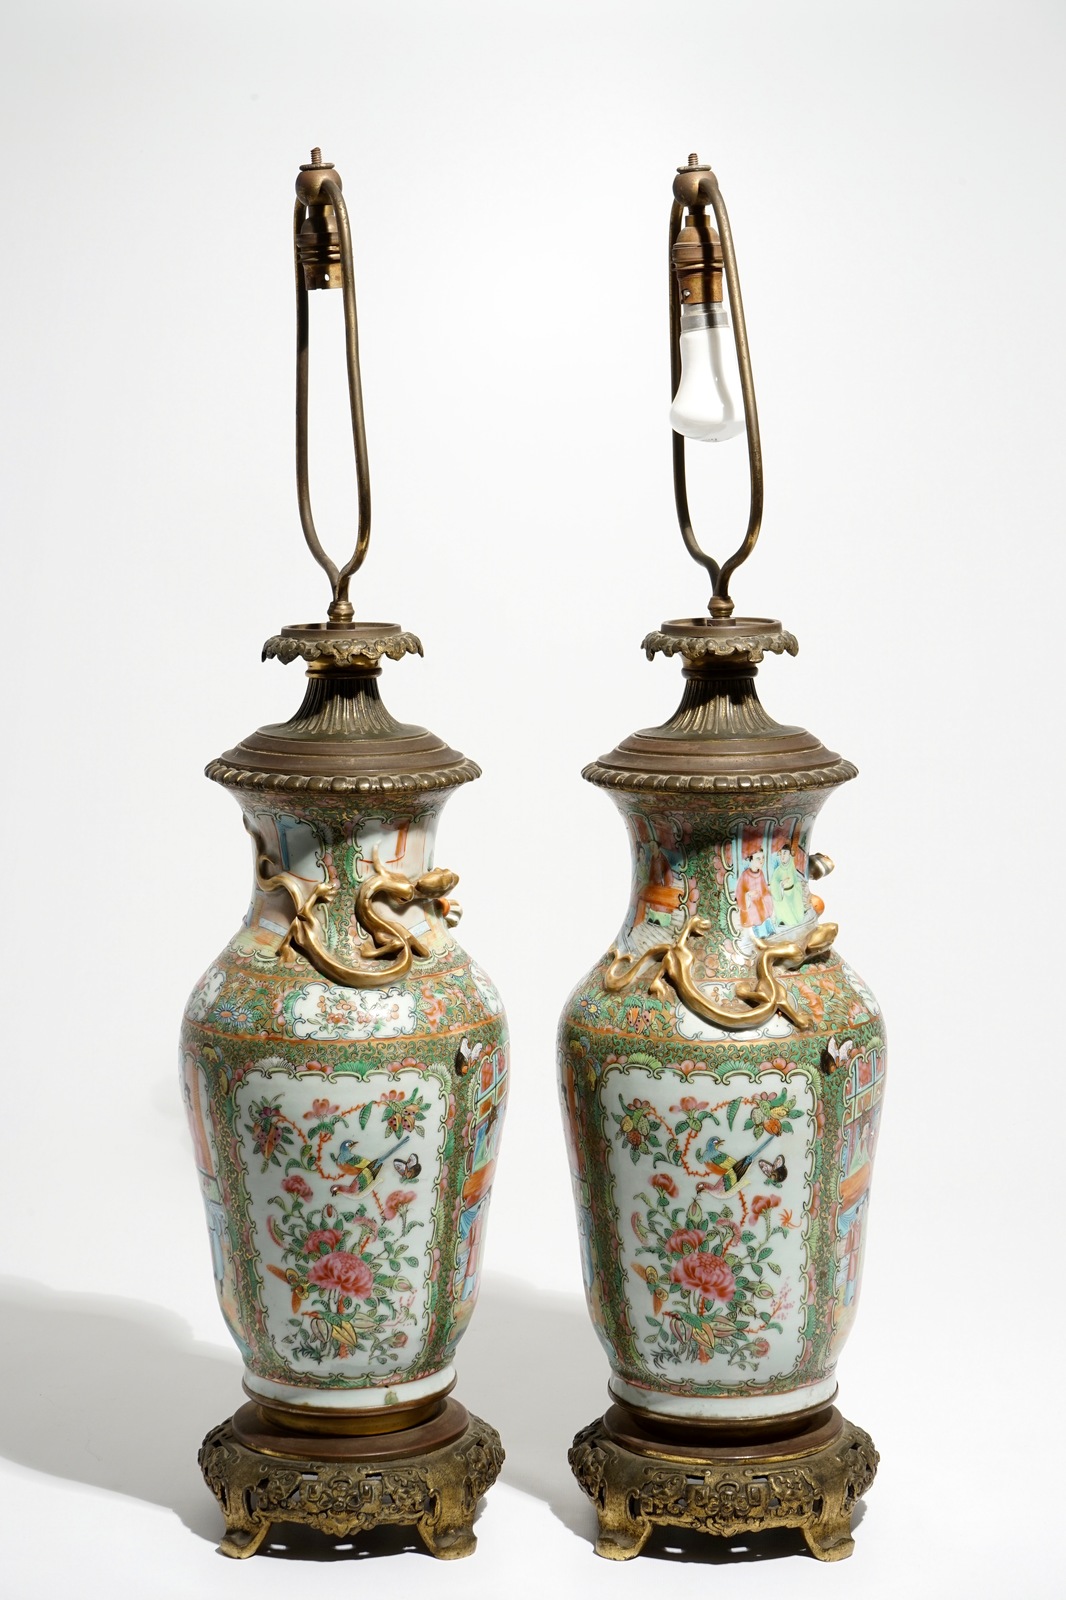 A pair of bronze-mounted Chinese Canton famille rose vases, transformed into lamps, 19th C. - Image 4 of 6